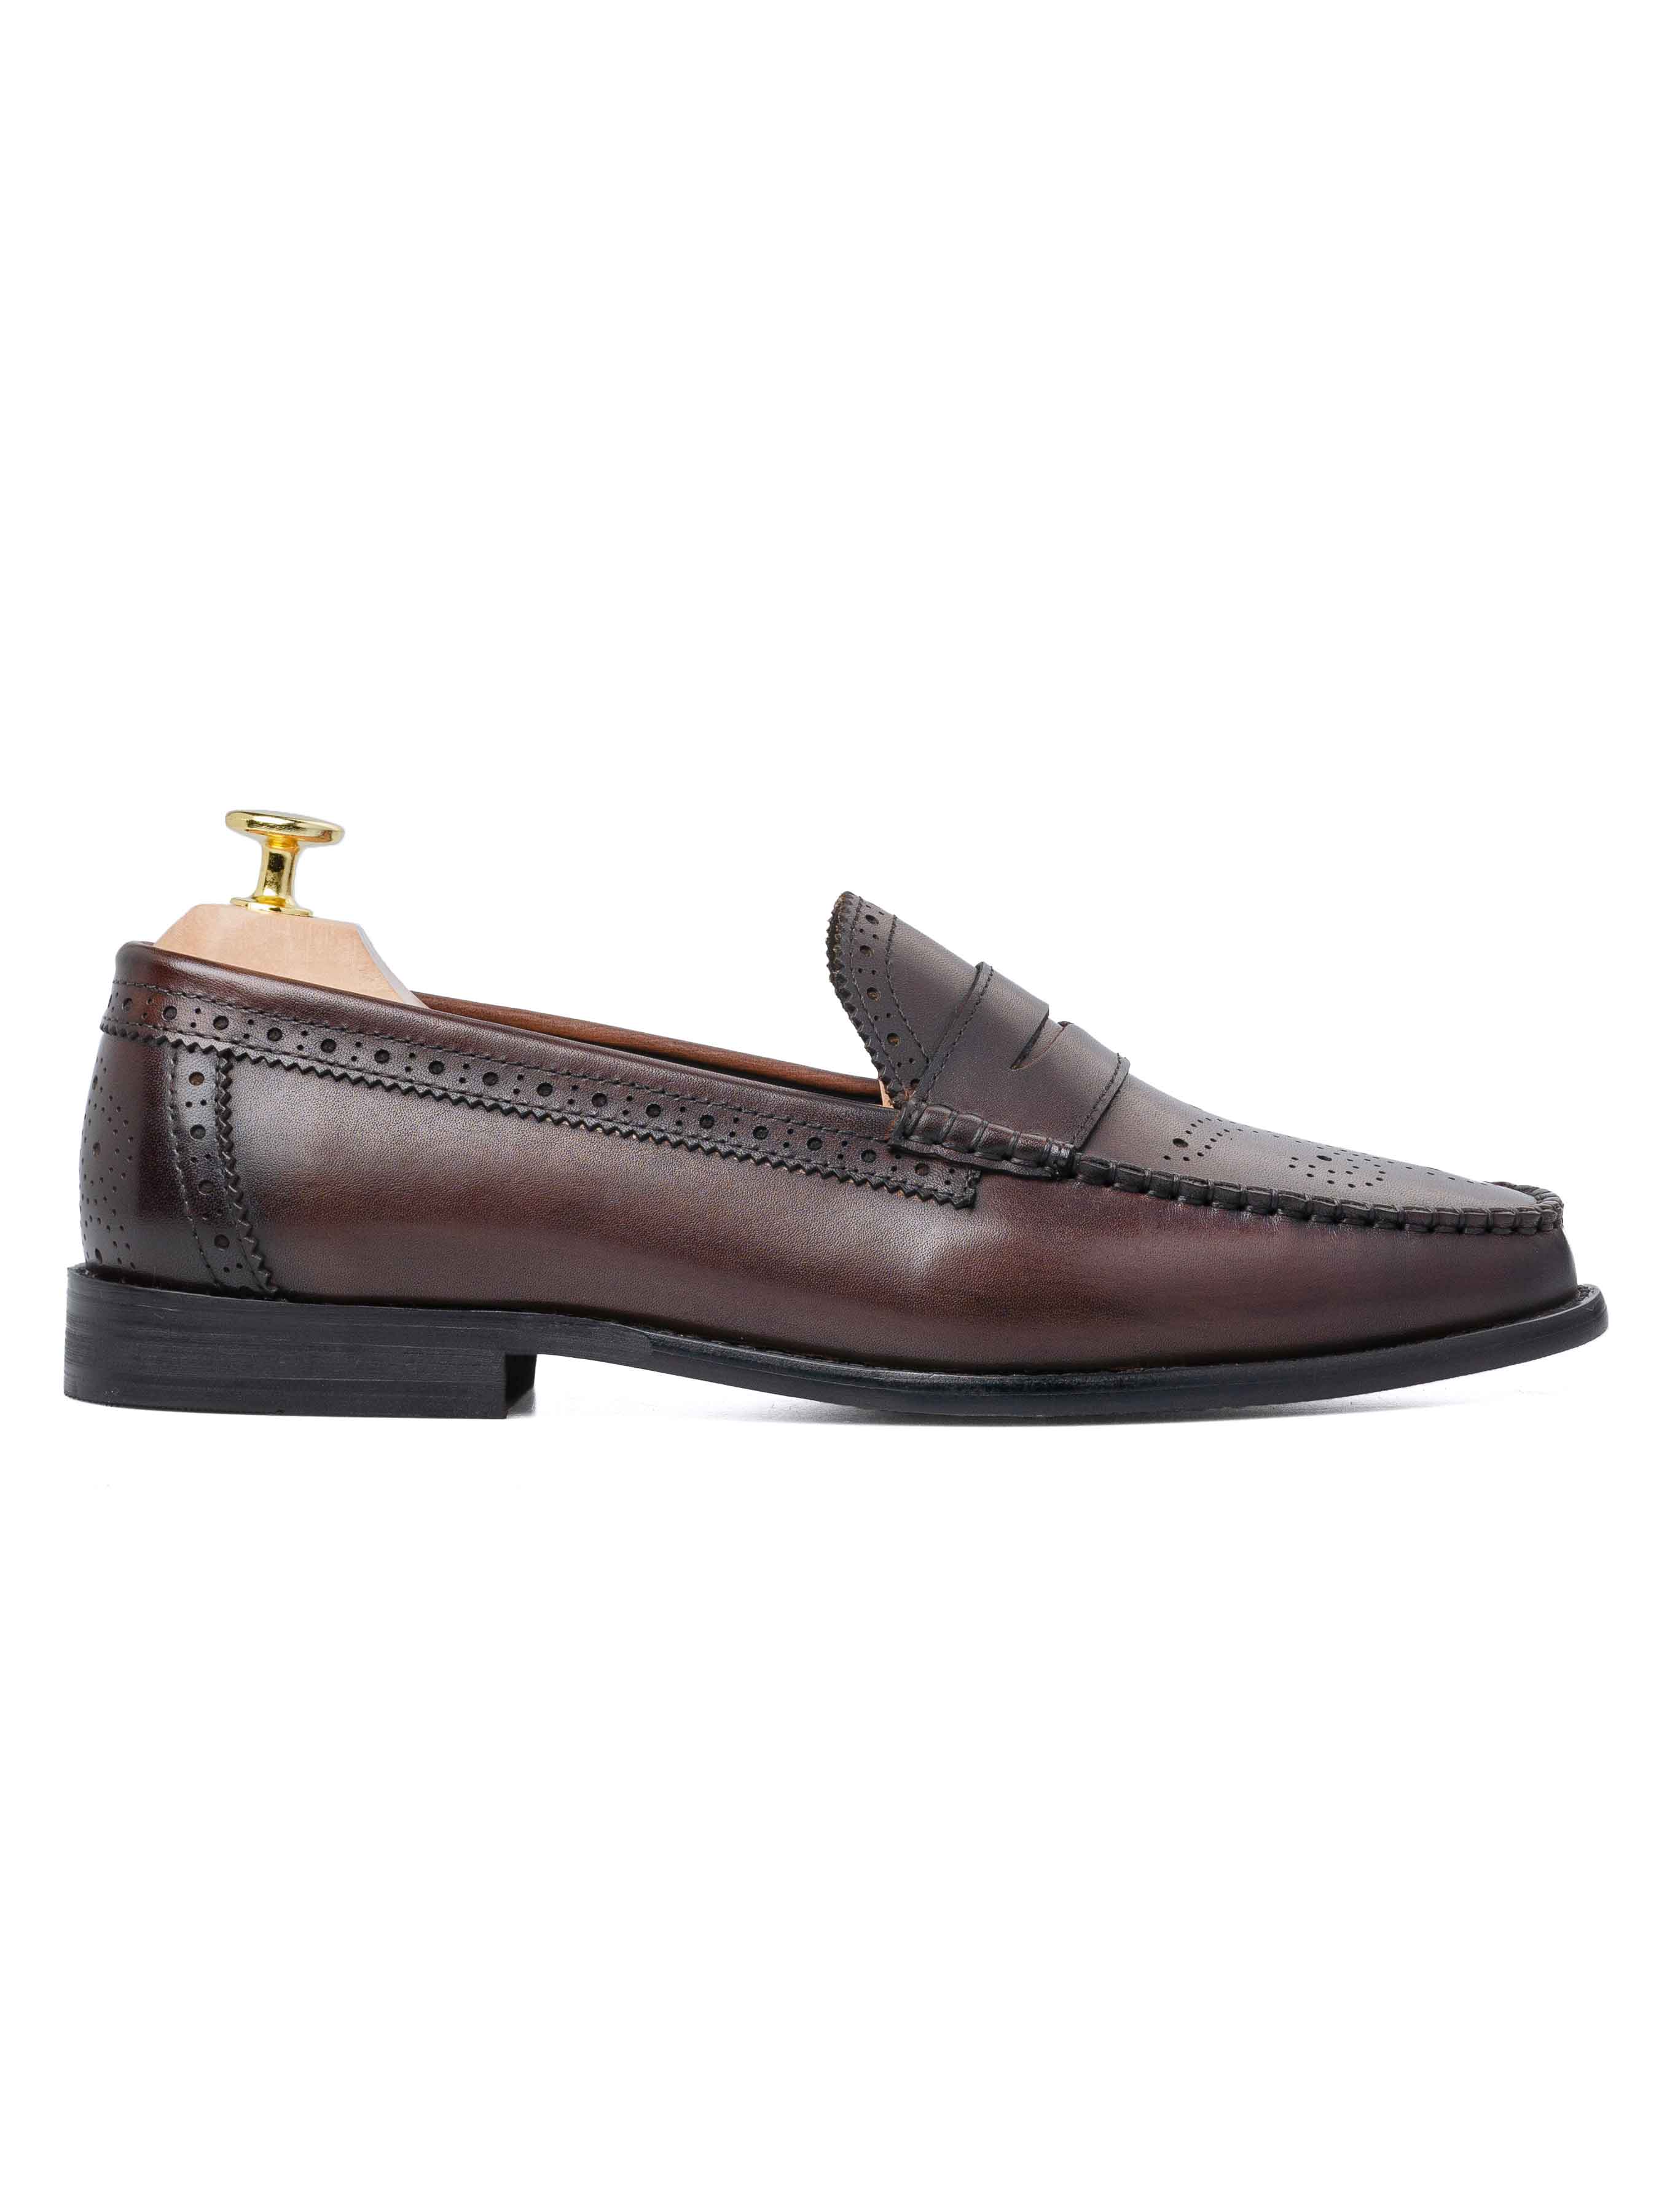 Brogue Penny Loafer - Coffee